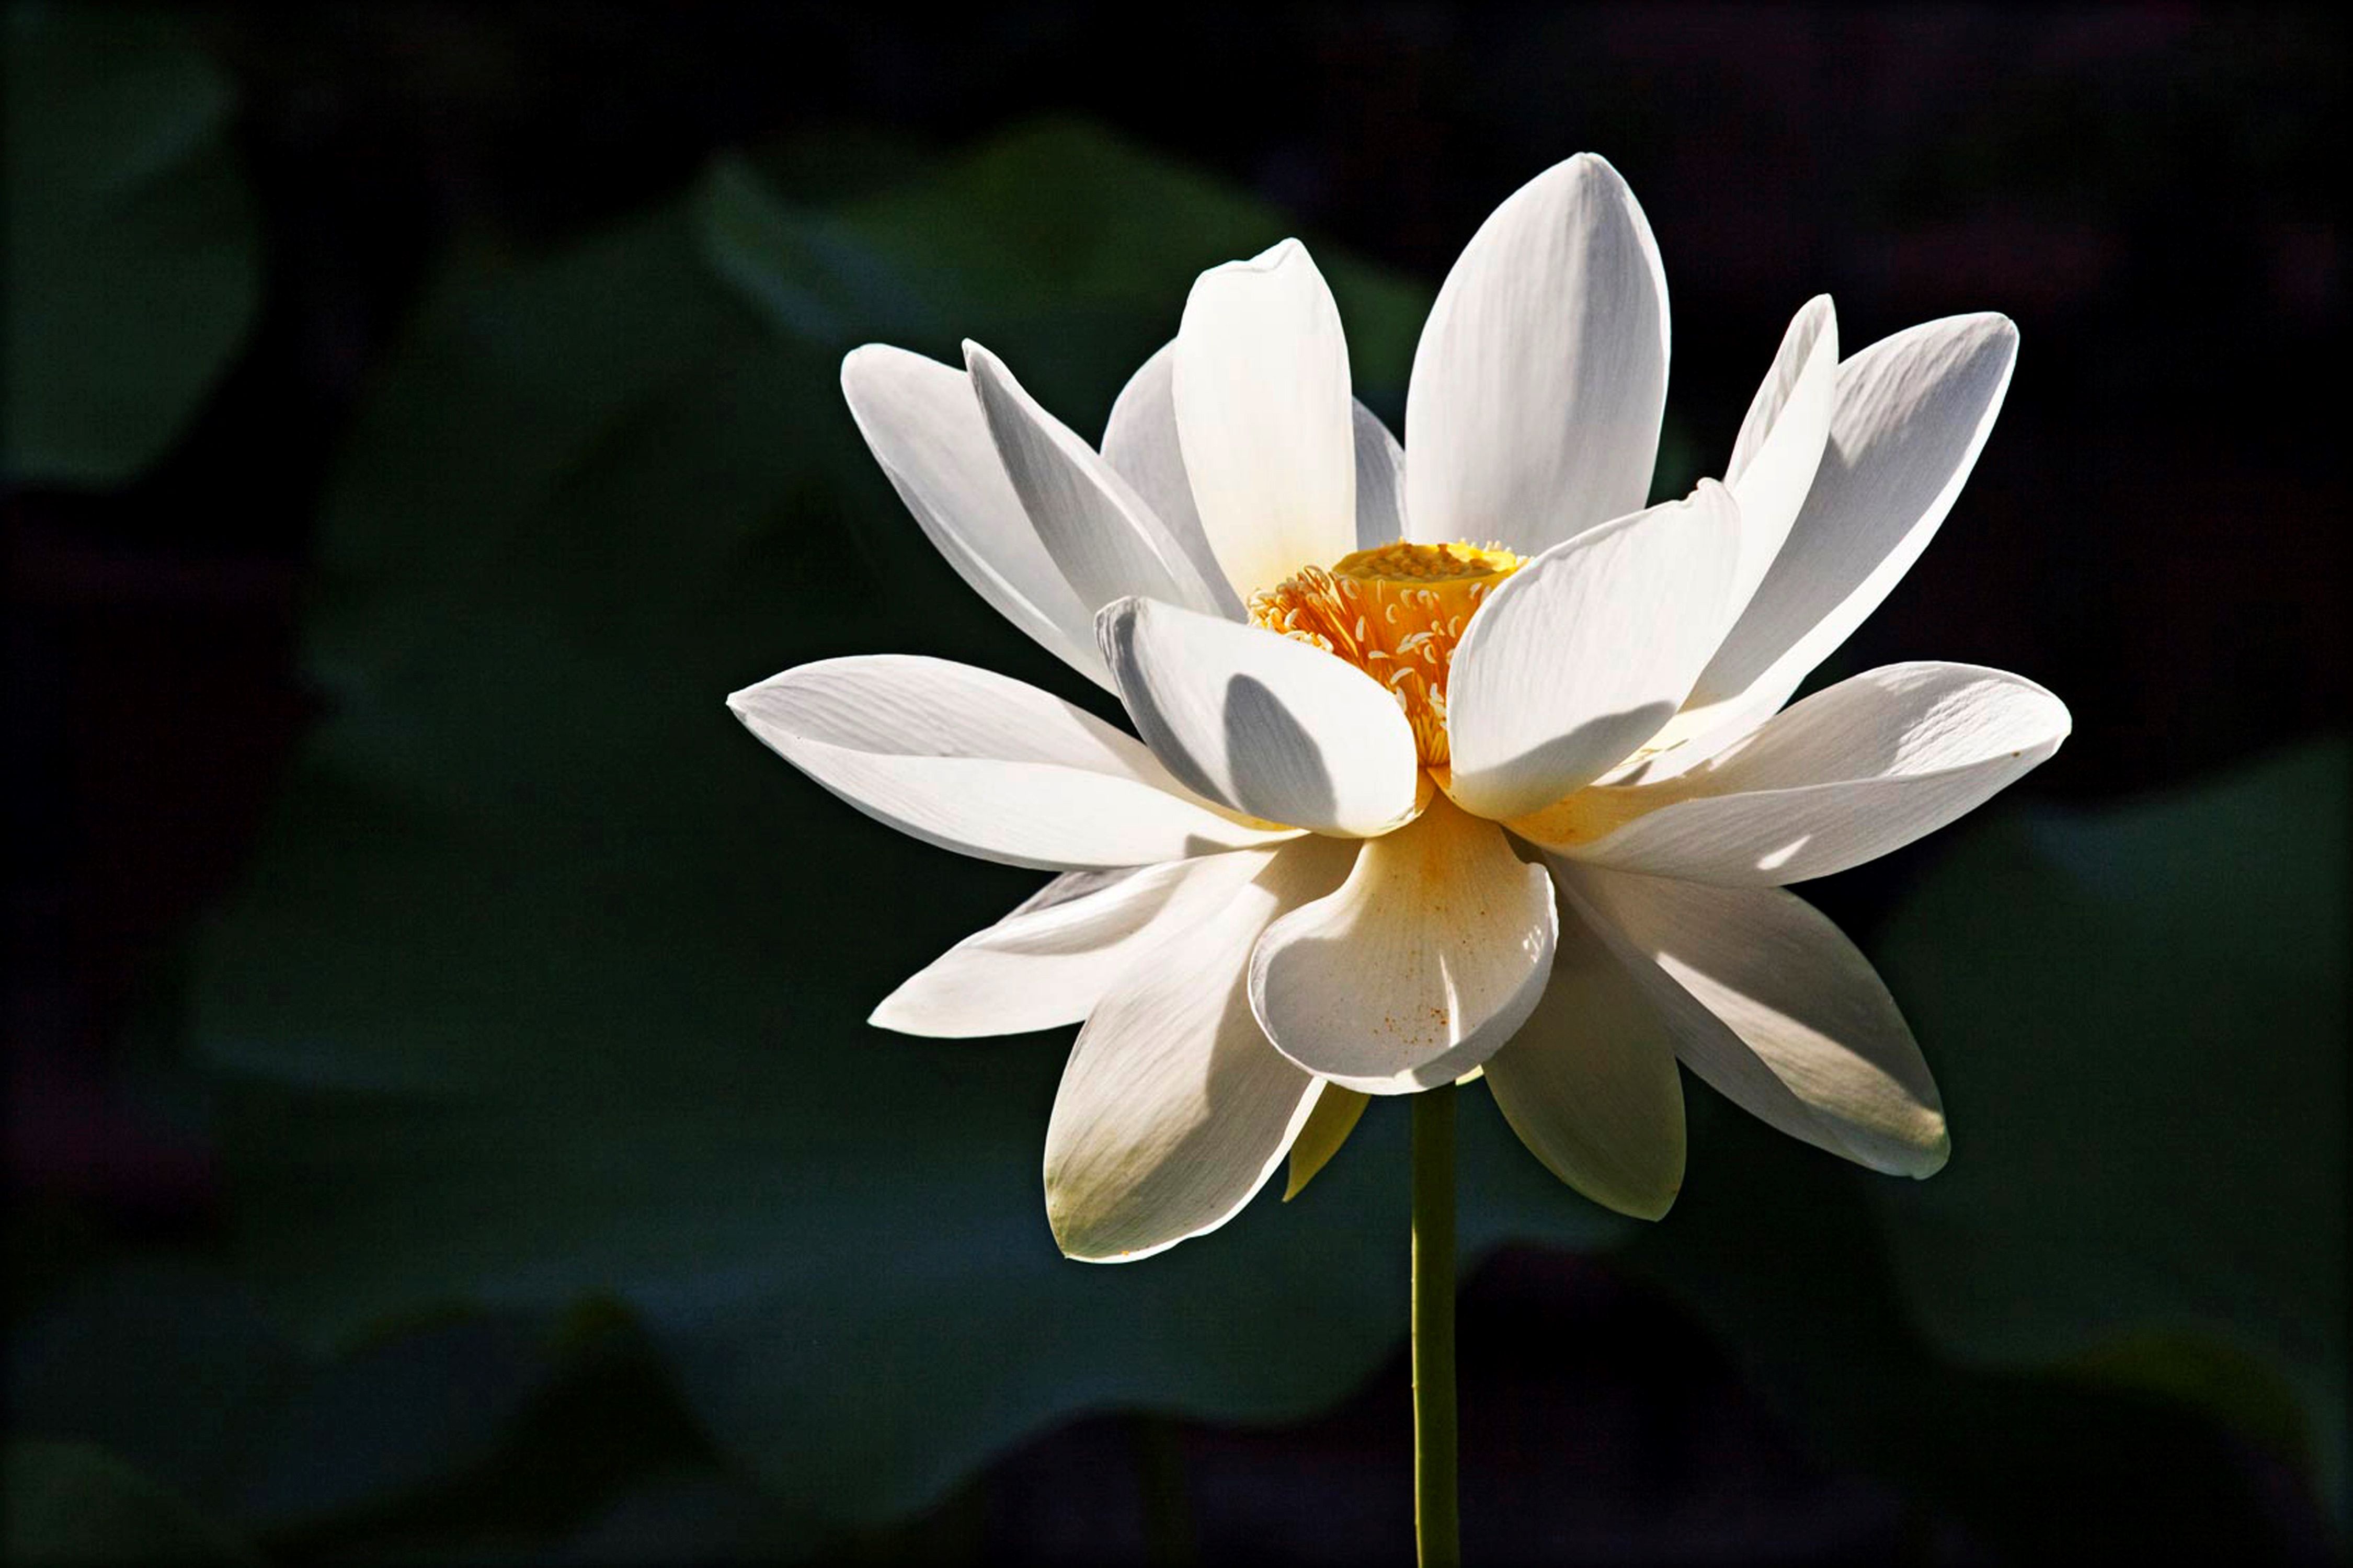 Lotus Flower Meaning What Is The Symbolism Behind The Lotus